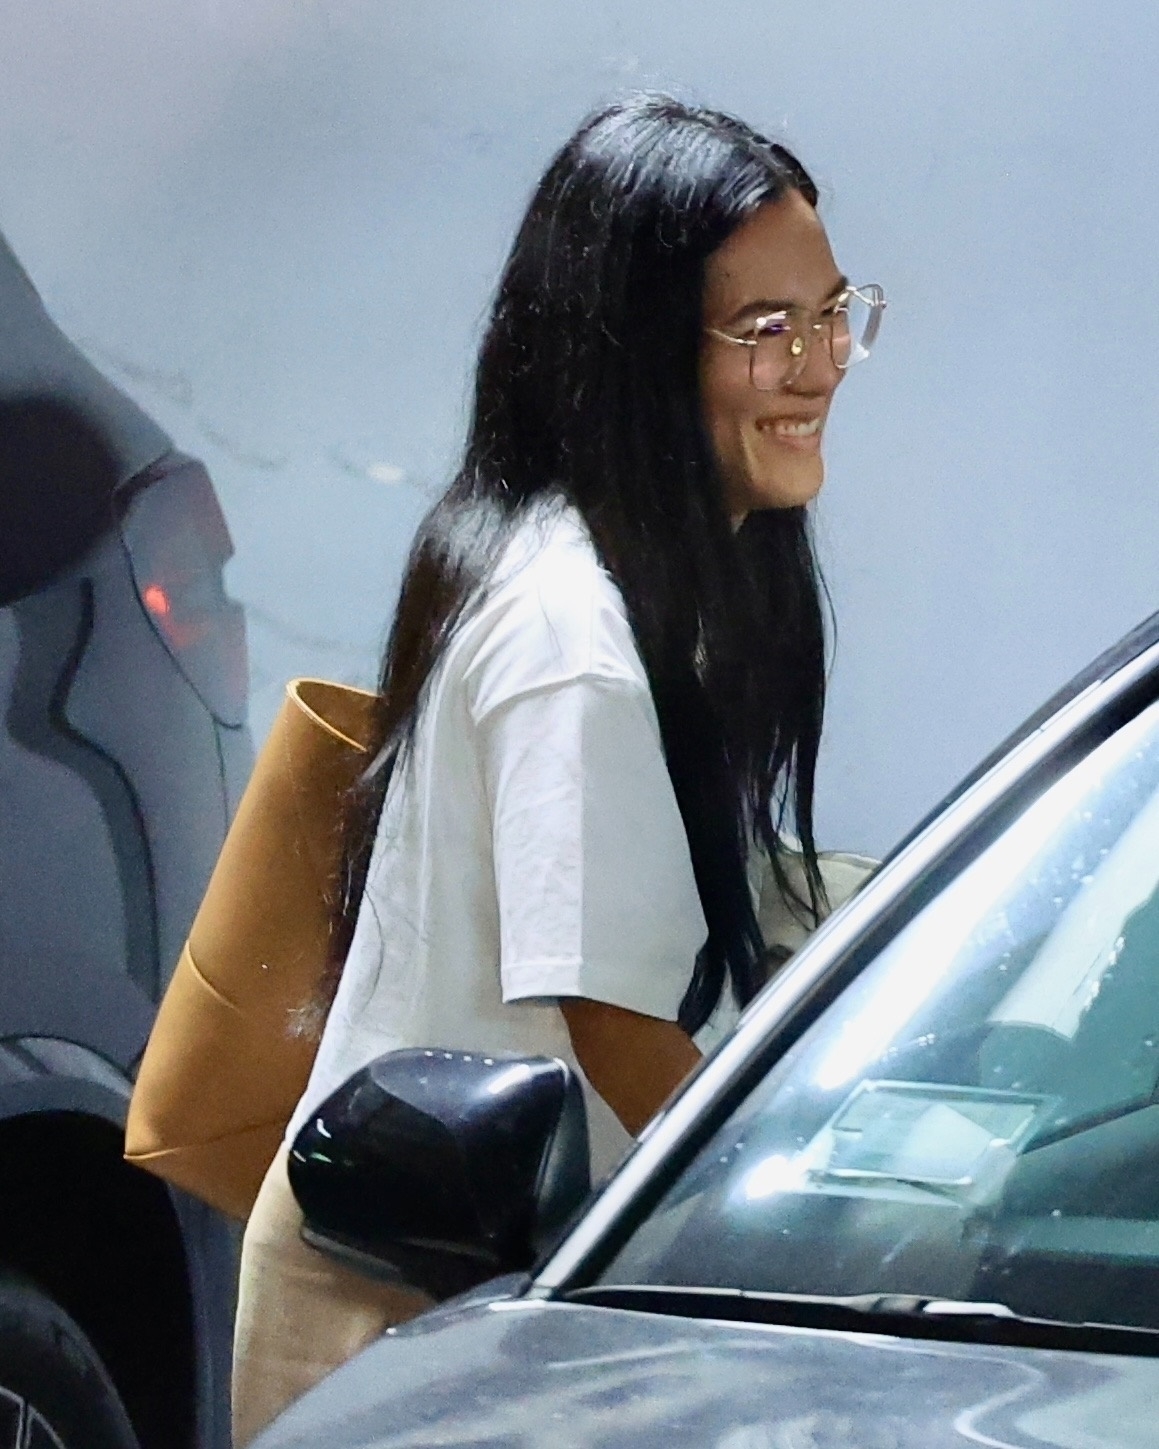 Ali was smiling all the way to the car as they left Sushi Park in West Hollywood